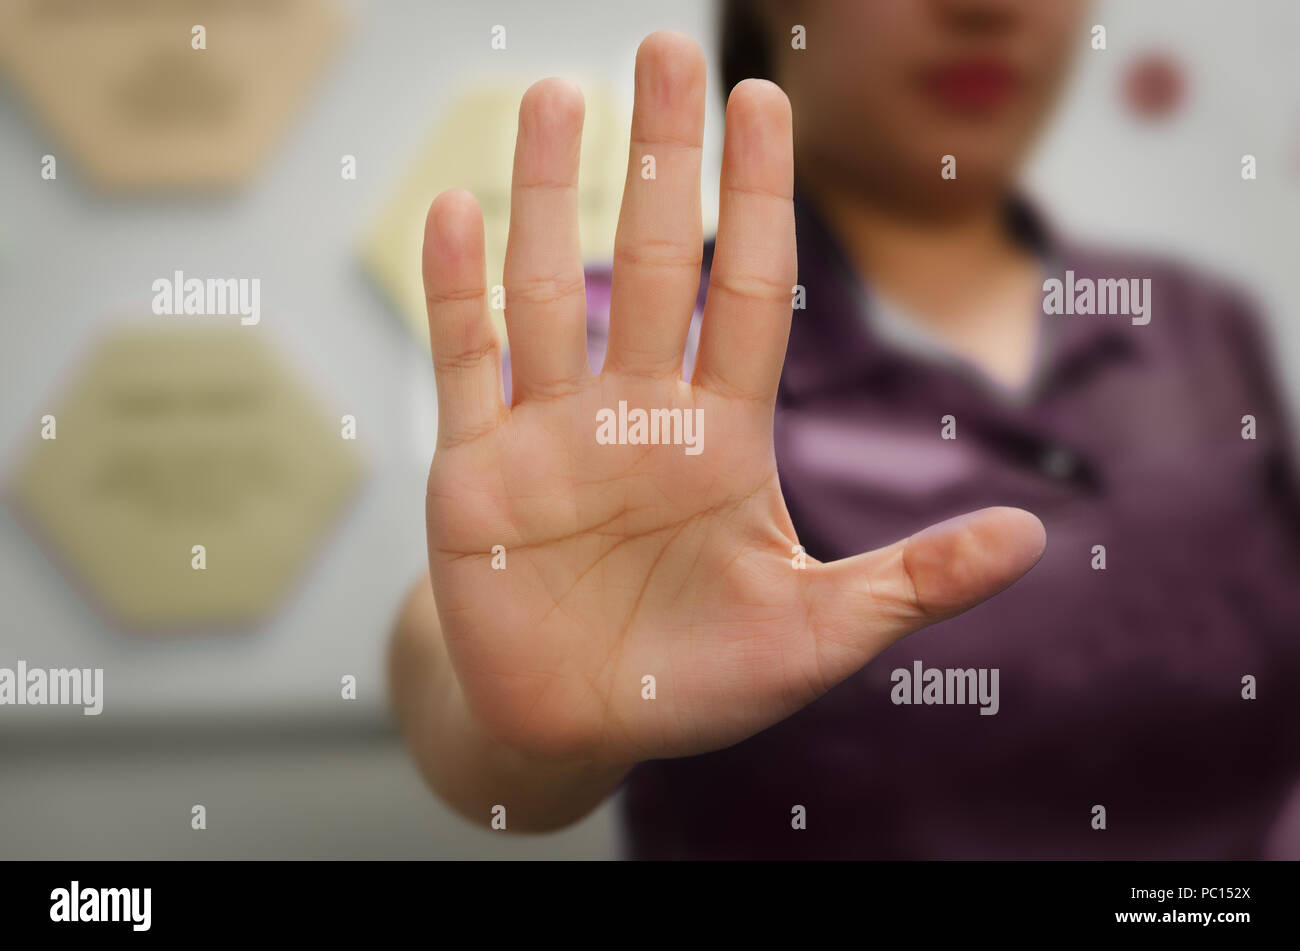 A person showing an open hand signal that means stop or wait isolated on a blurred background Stock Photo